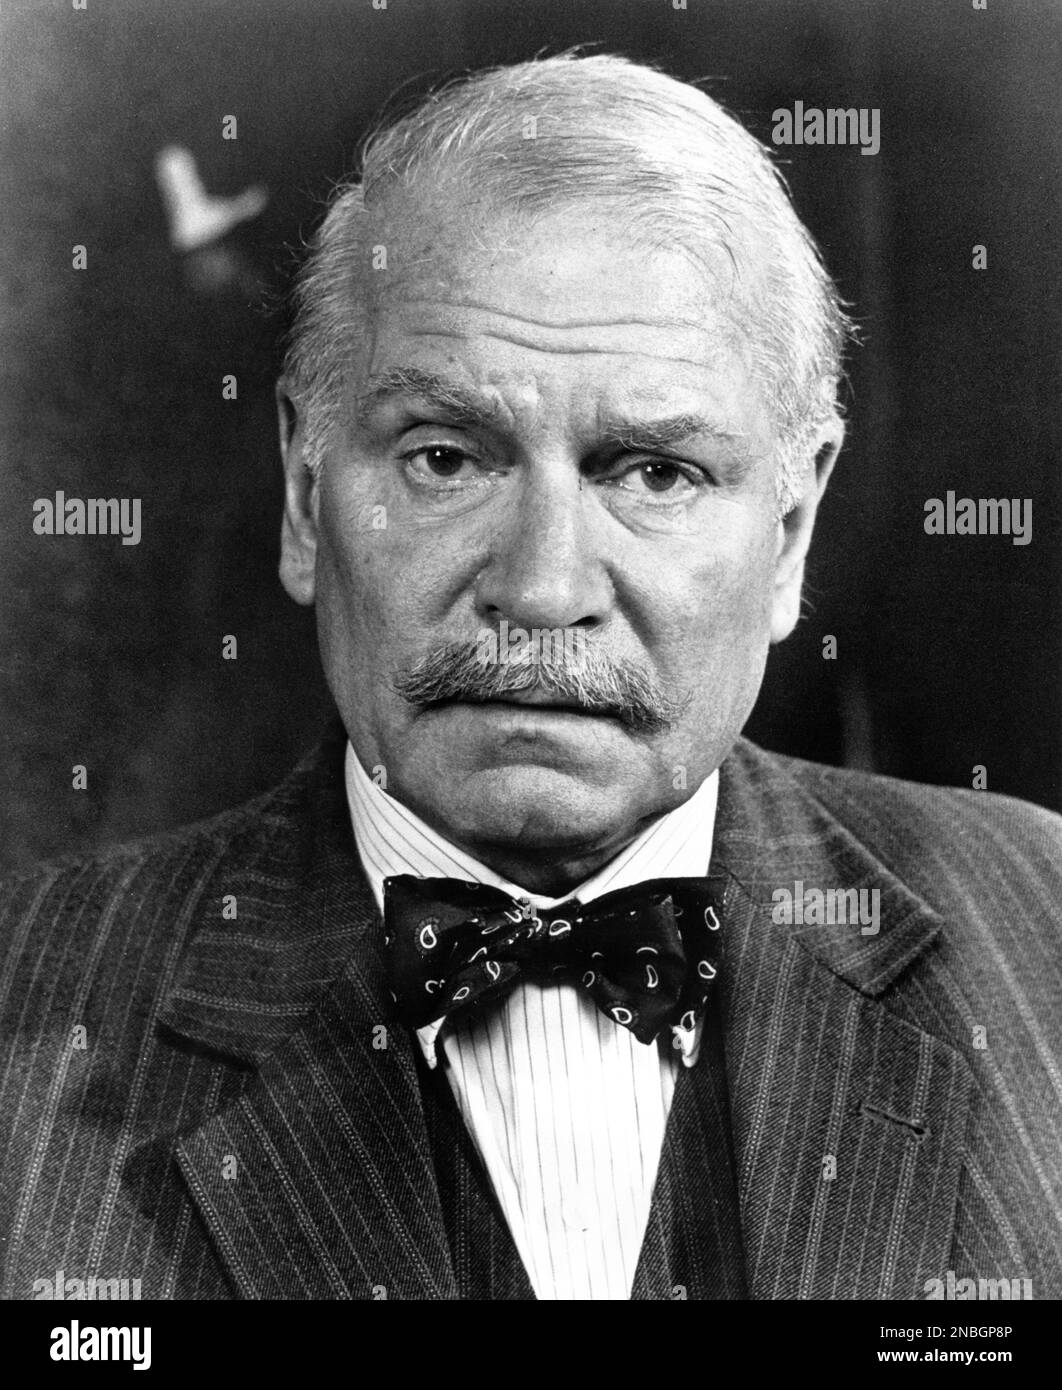 LAURENCE OLIVIER in A BRIDGE TOO FAR 1977 director RICHARD ATTENBOROUGH screenplay William Goldman based on the book by Cornelius Ryan USA - UK co-production Joseph E. Levine Productions / United Artists Stock Photo